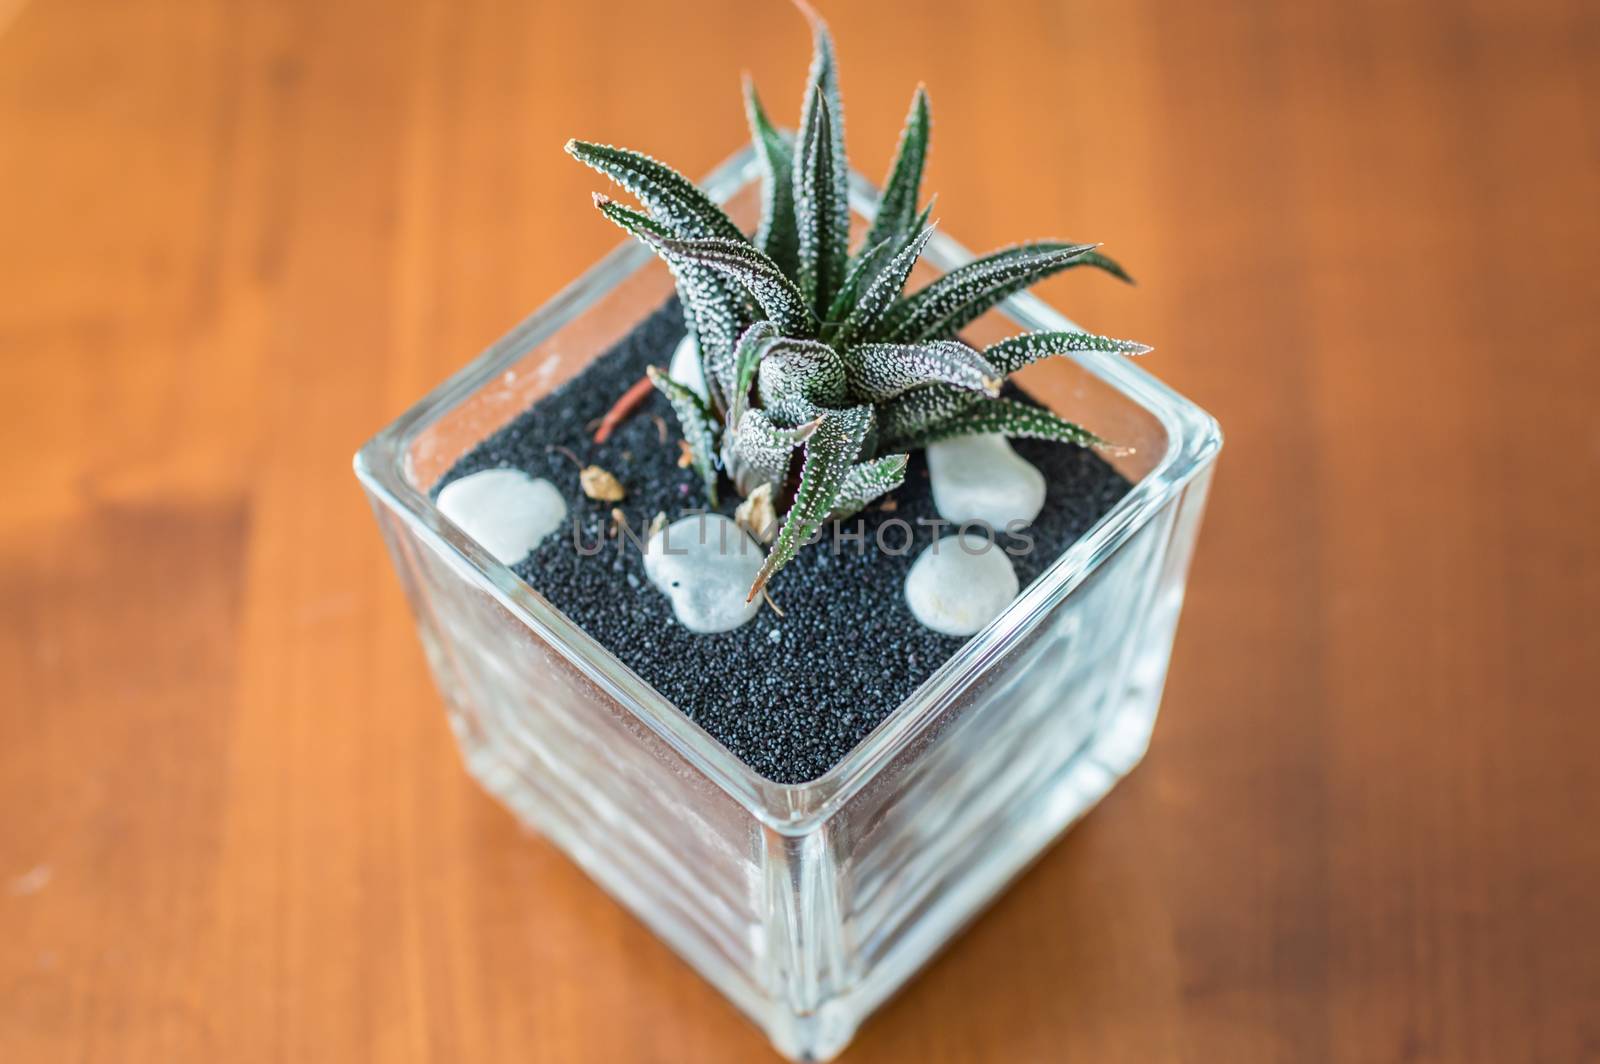 small green cactus in a glass pot on table